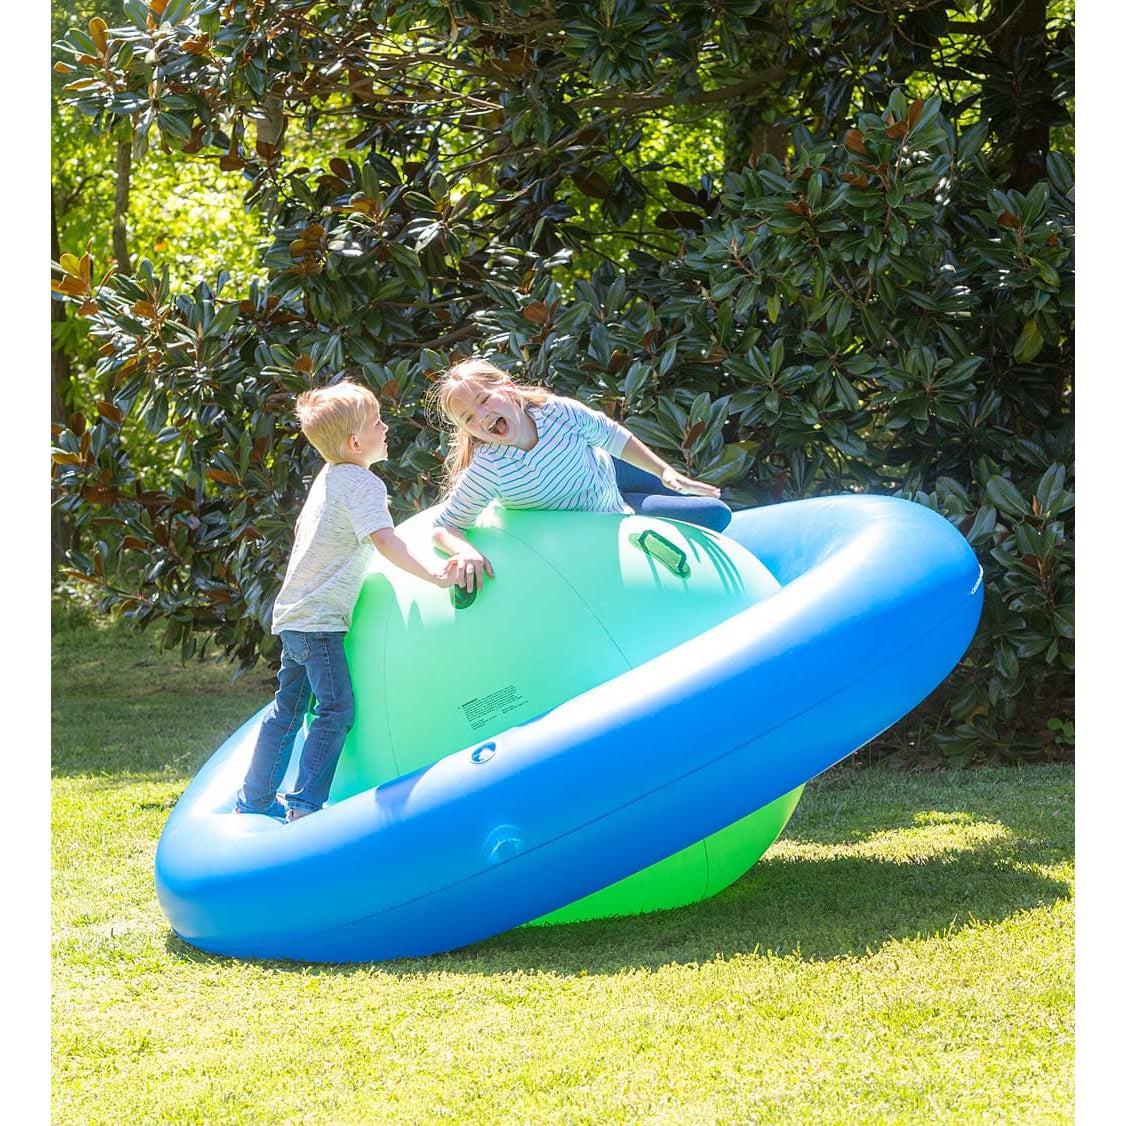 HearthSong-Rock With It! Giant Inflatable Dome Rocker-CG733451-Legacy Toys